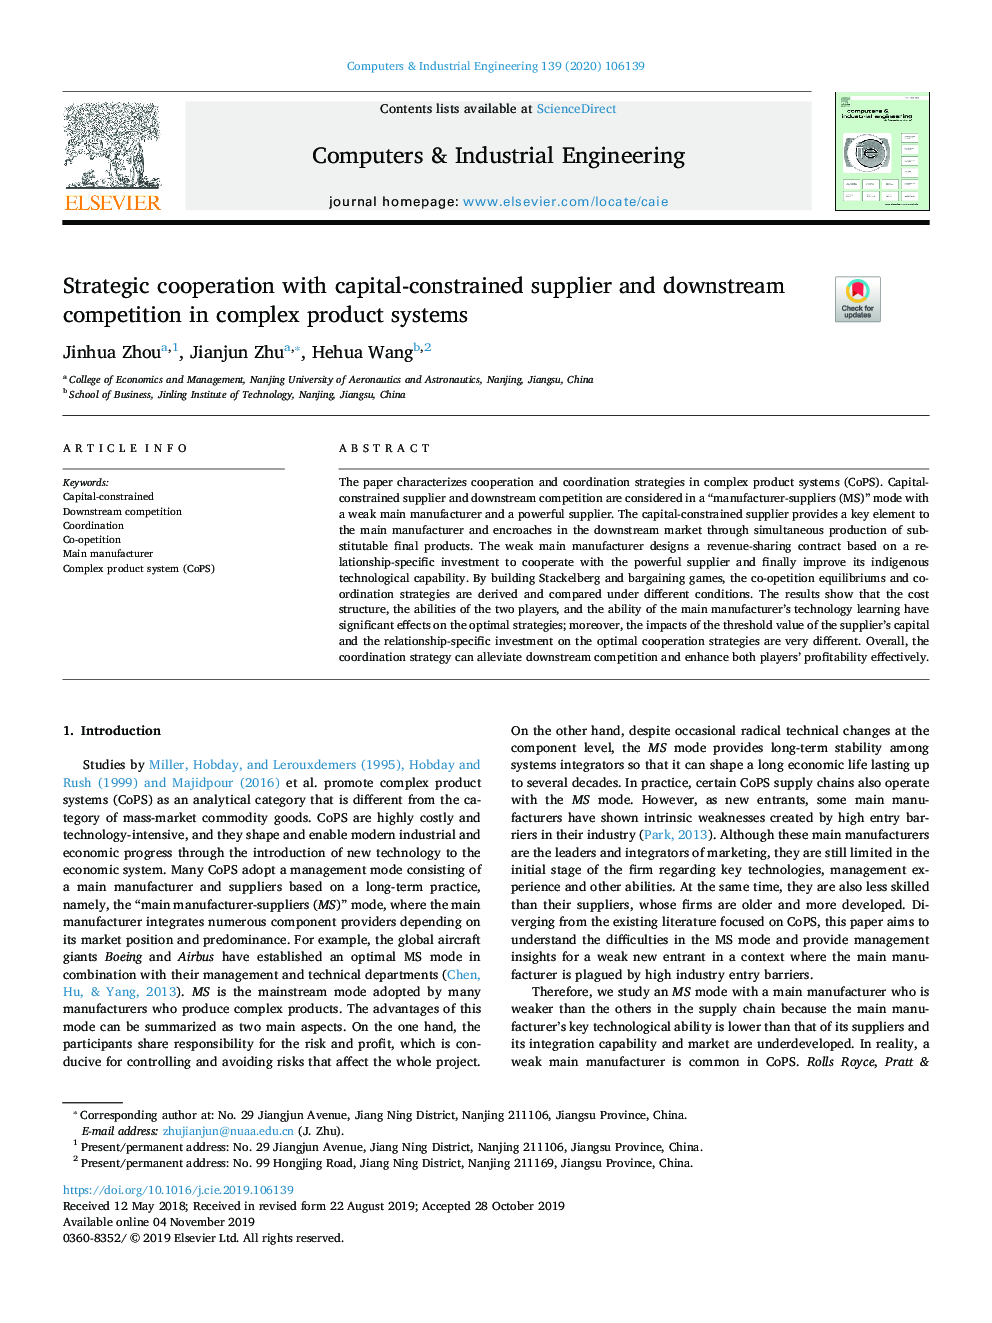 Strategic cooperation with capital-constrained supplier and downstream competition in complex product systems